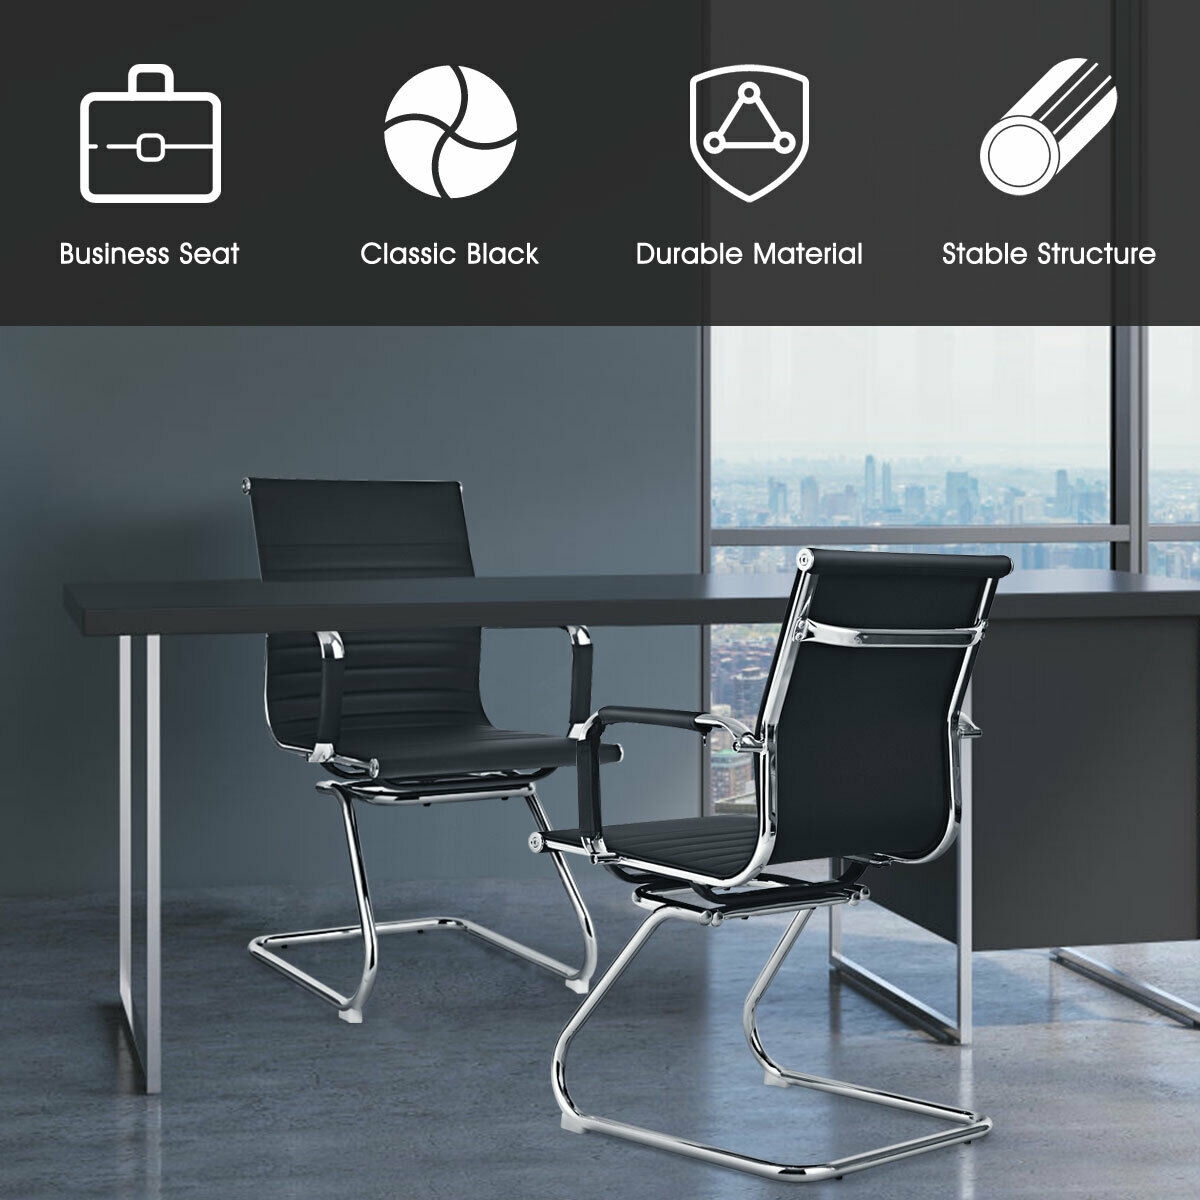 Black 1 pcs Shunzhi Mesh Reception Chair Heavy Duty Office Guest Chair with Lumbar Support Sled Base and Ergonomic Back with Armrest for Visitors/Meeting Groups/Reception/Conference Room 